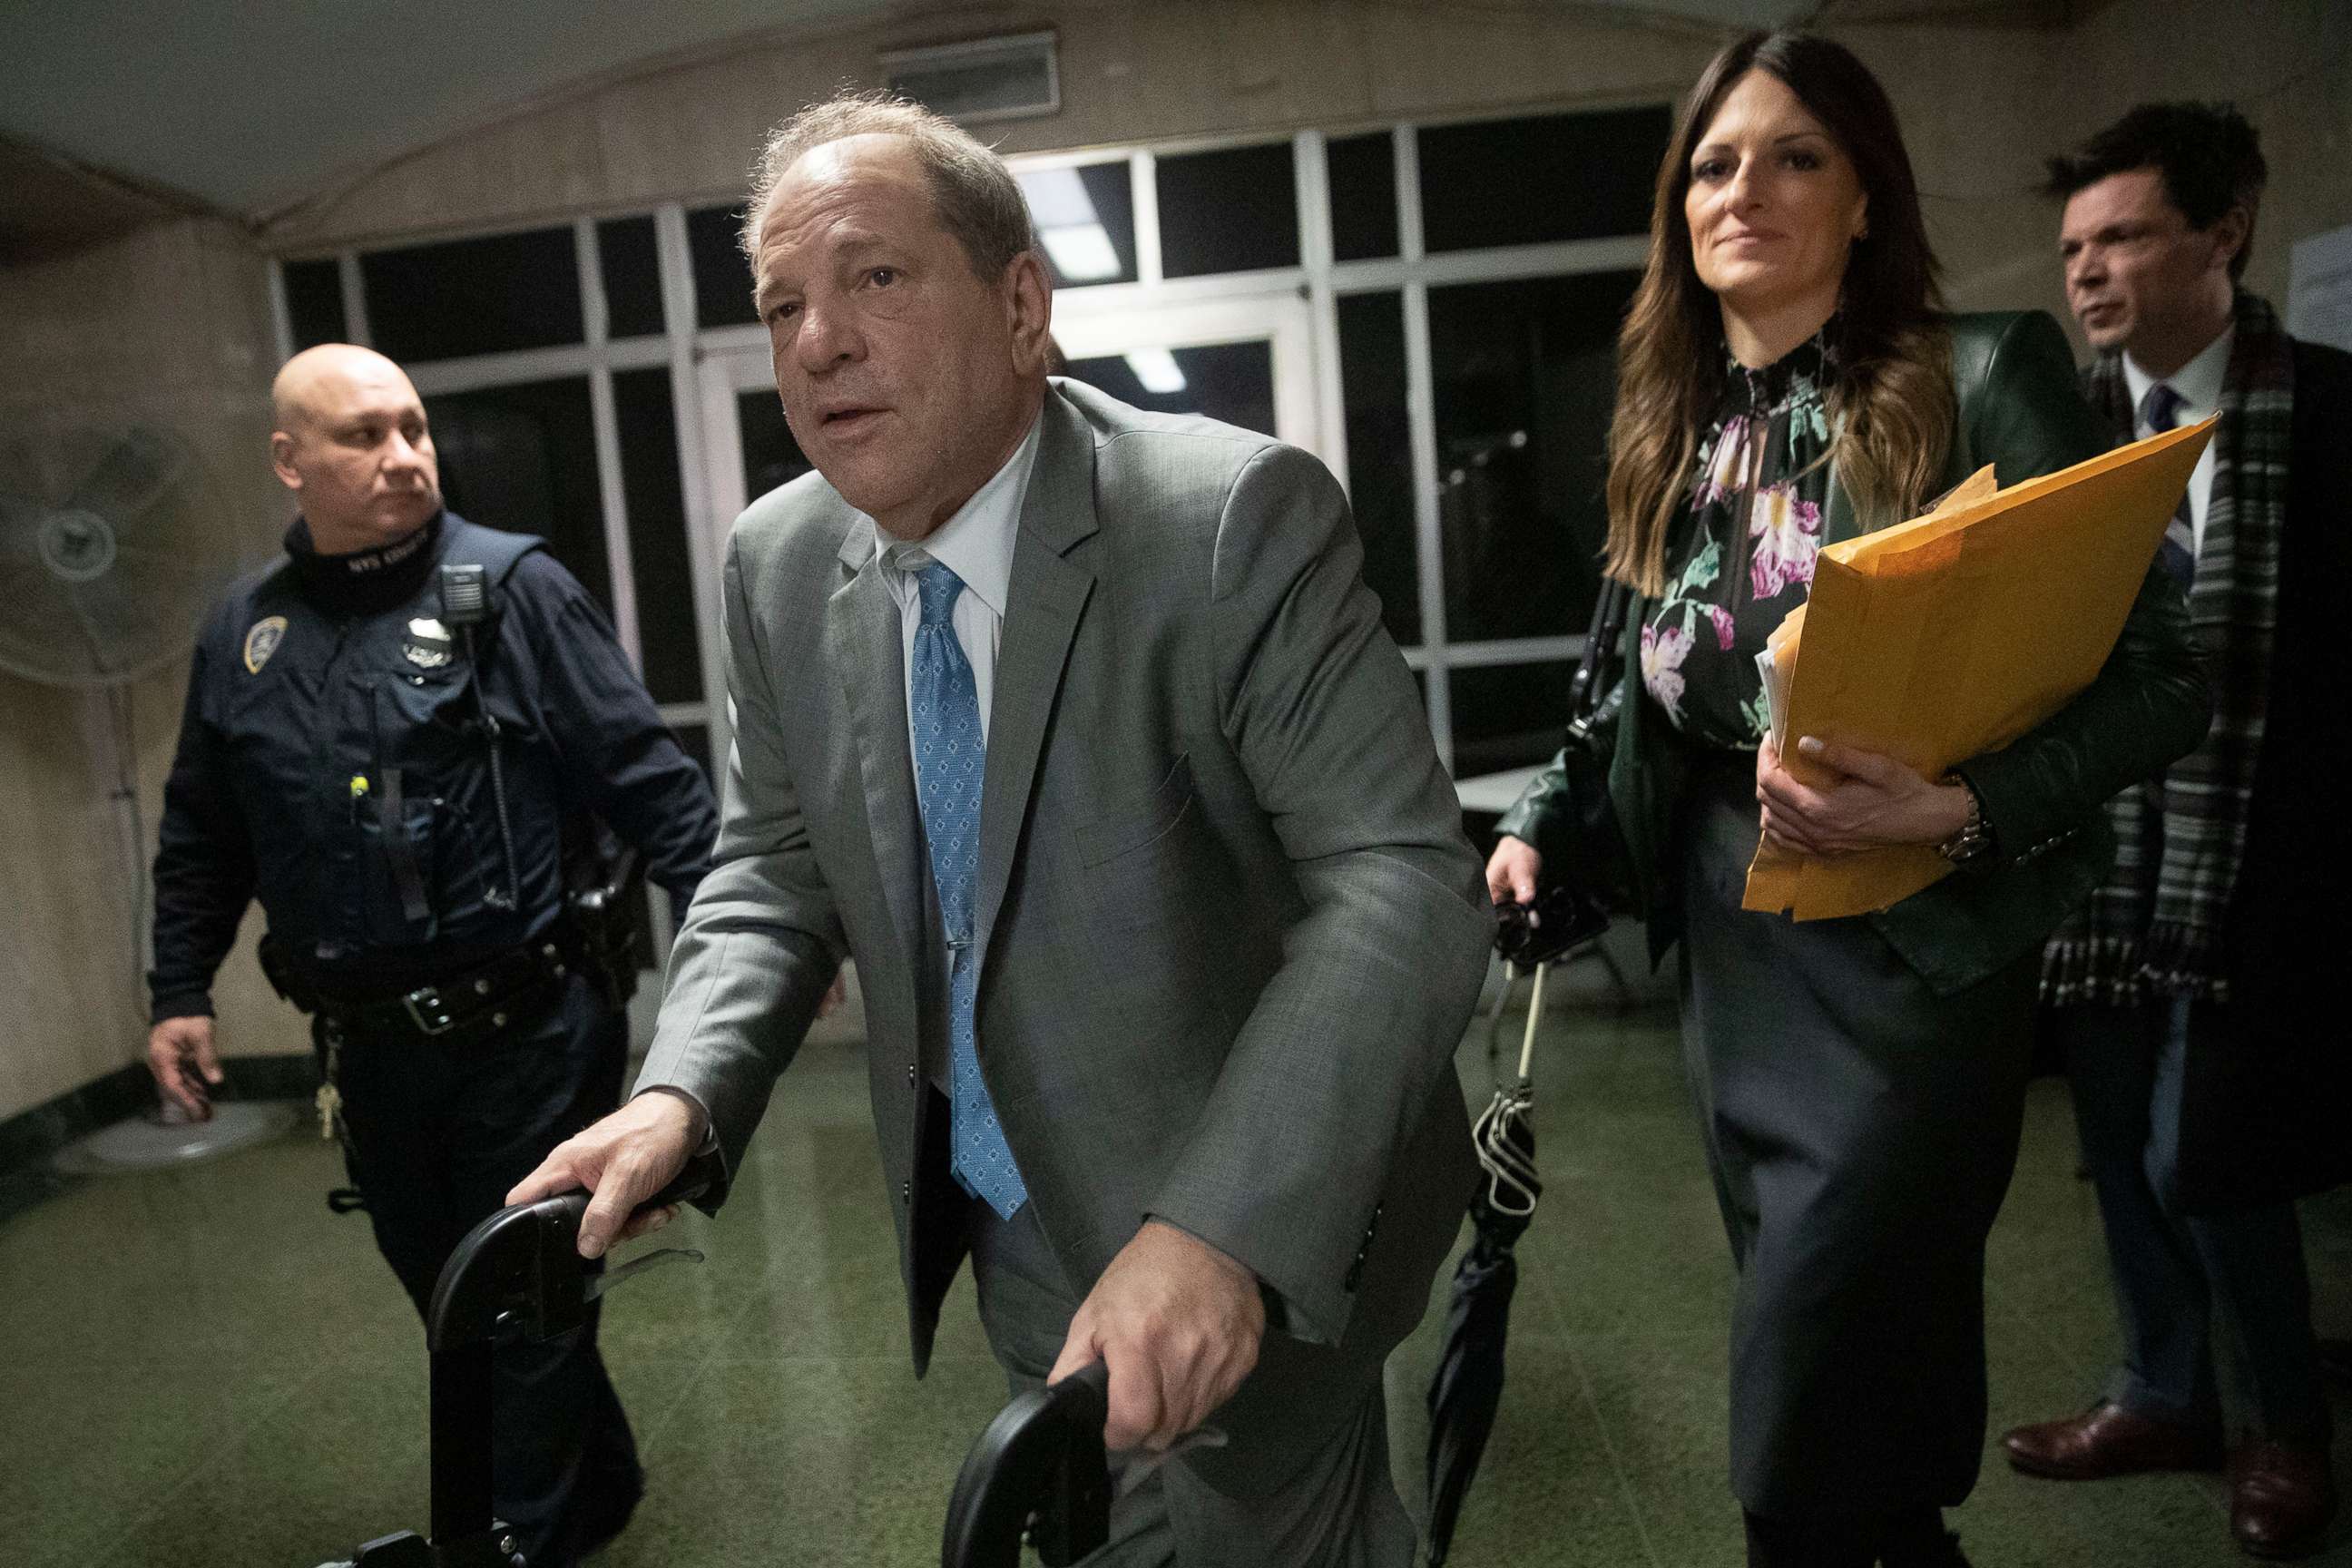 PHOTO: Harvey Weinstein leaves a Manhattan courthouse followed by his lead attorney Donna Rotunno in the first day of jury deliberations in his rape trial, Feb. 18, 2020, in New York.